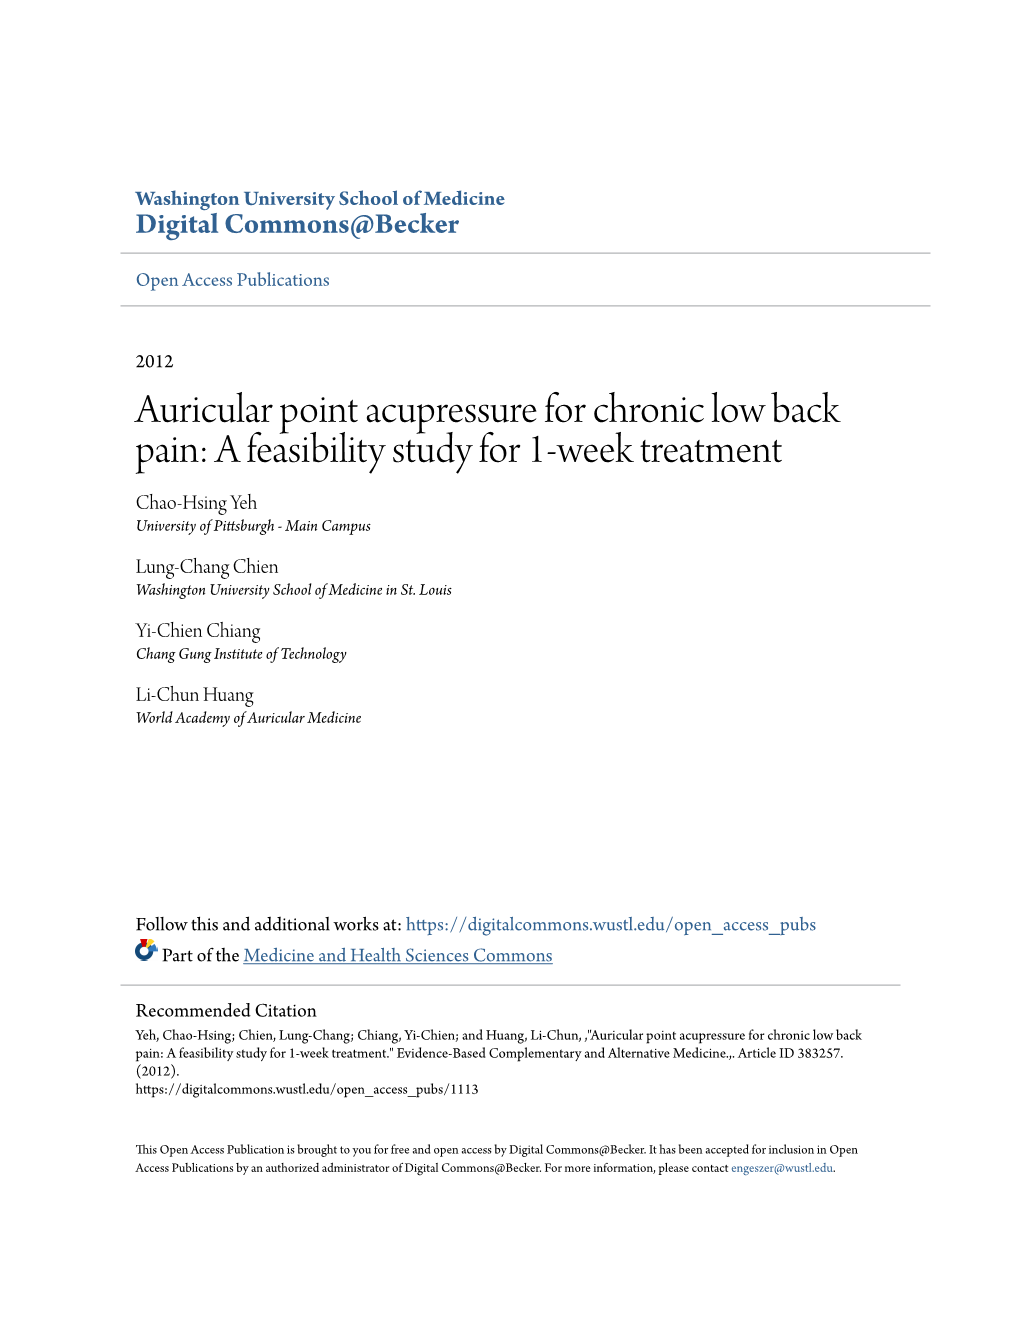 Auricular Point Acupressure for Chronic Low Back Pain: a Feasibility Study for 1-Week Treatment Chao-Hsing Yeh University of Pittsburgh - Main Campus